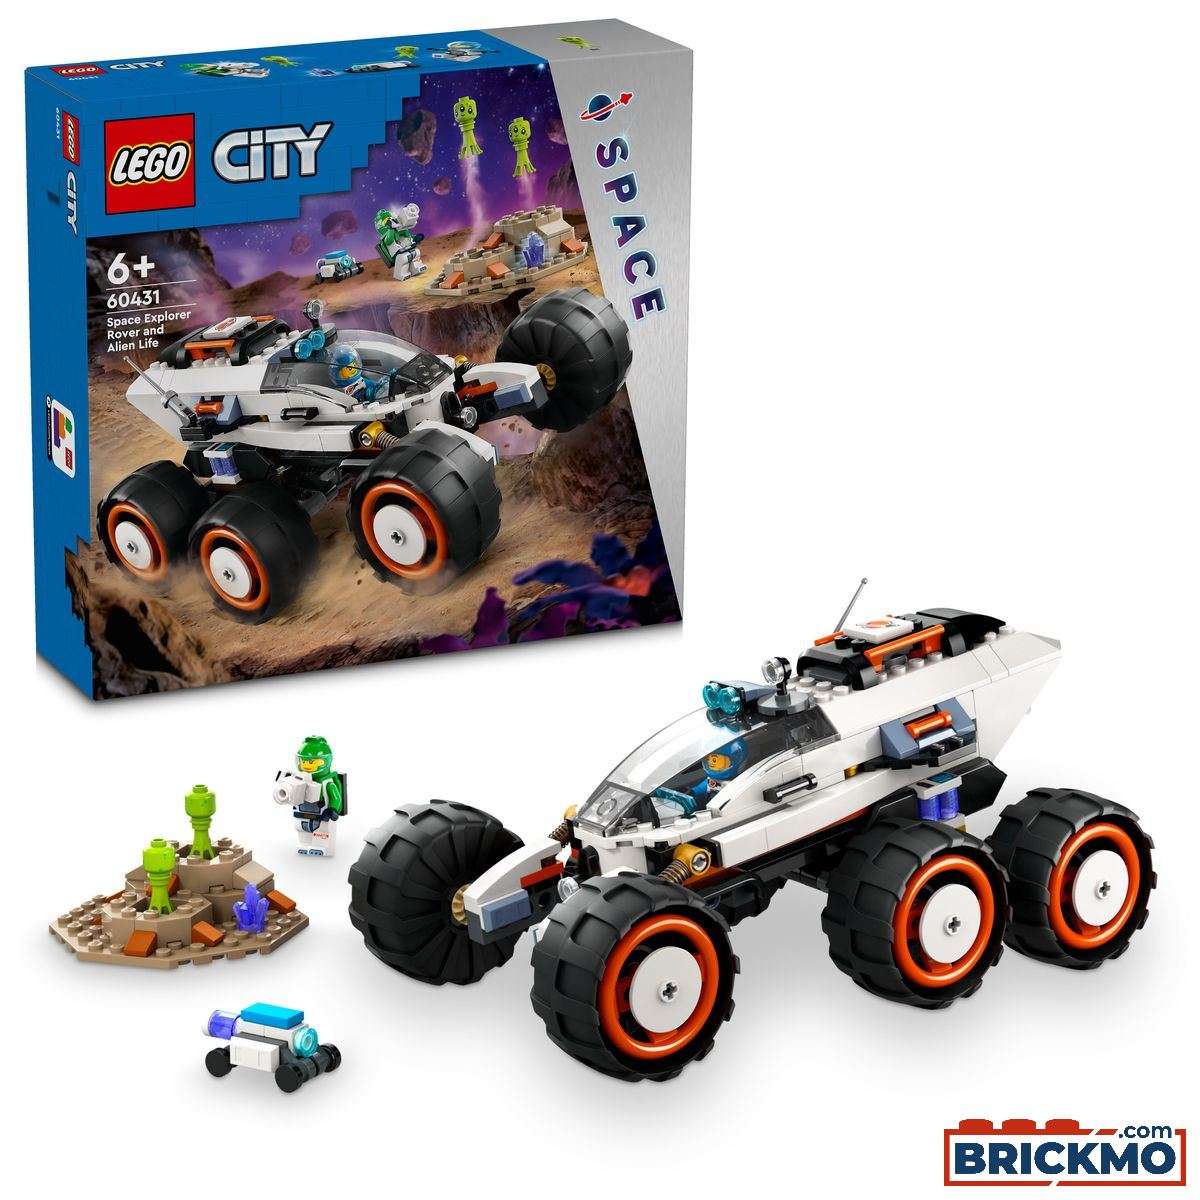 LEGO City 60431 Space Explorer Rover and Alien Life 60431